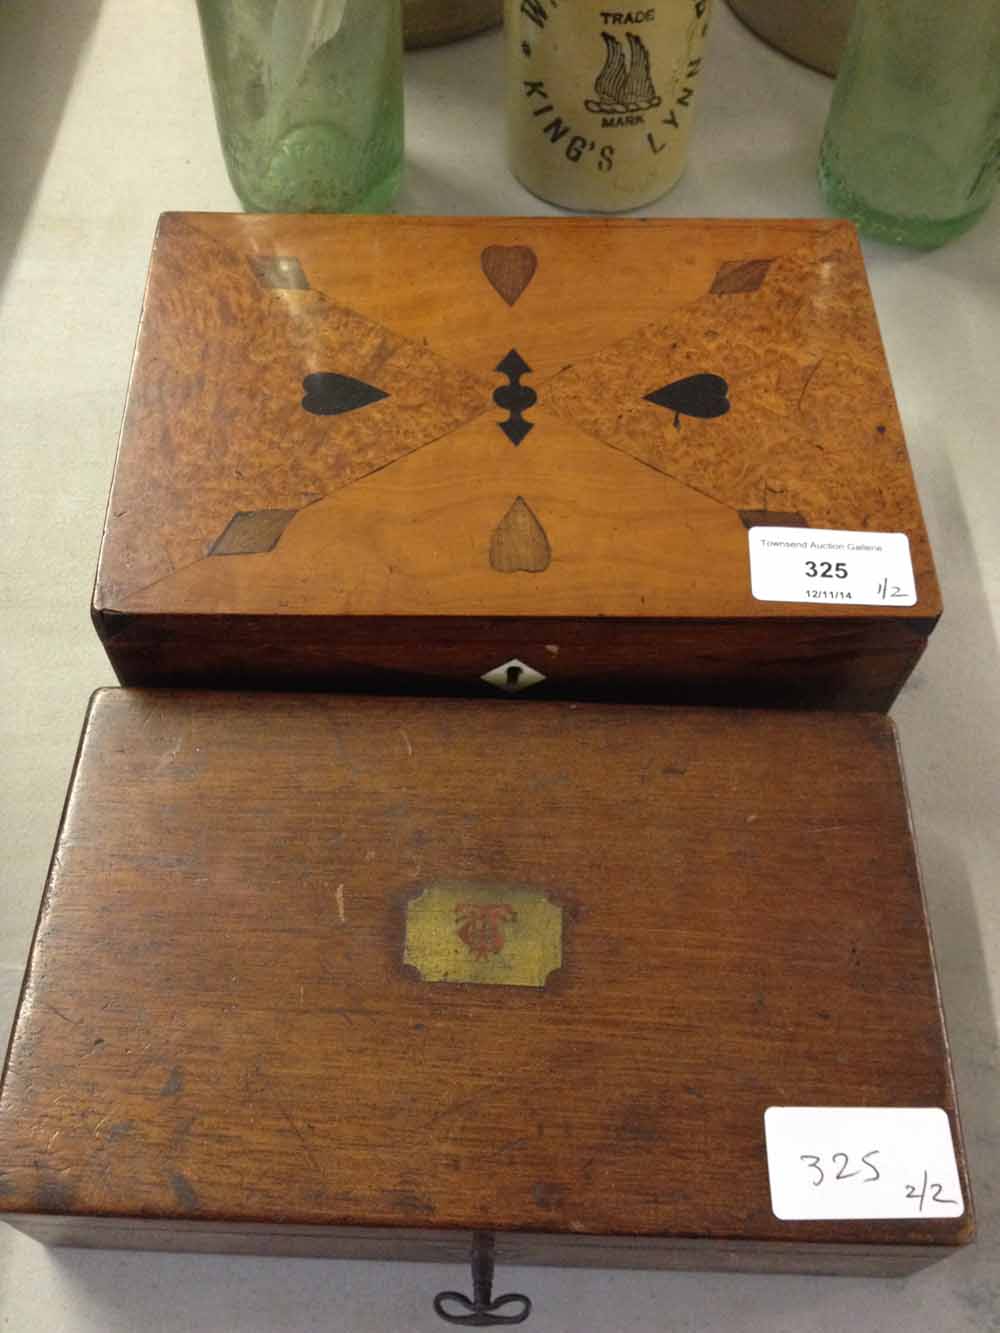 2 wooden boxes - one with inlaid hearts and diamonds to lid.